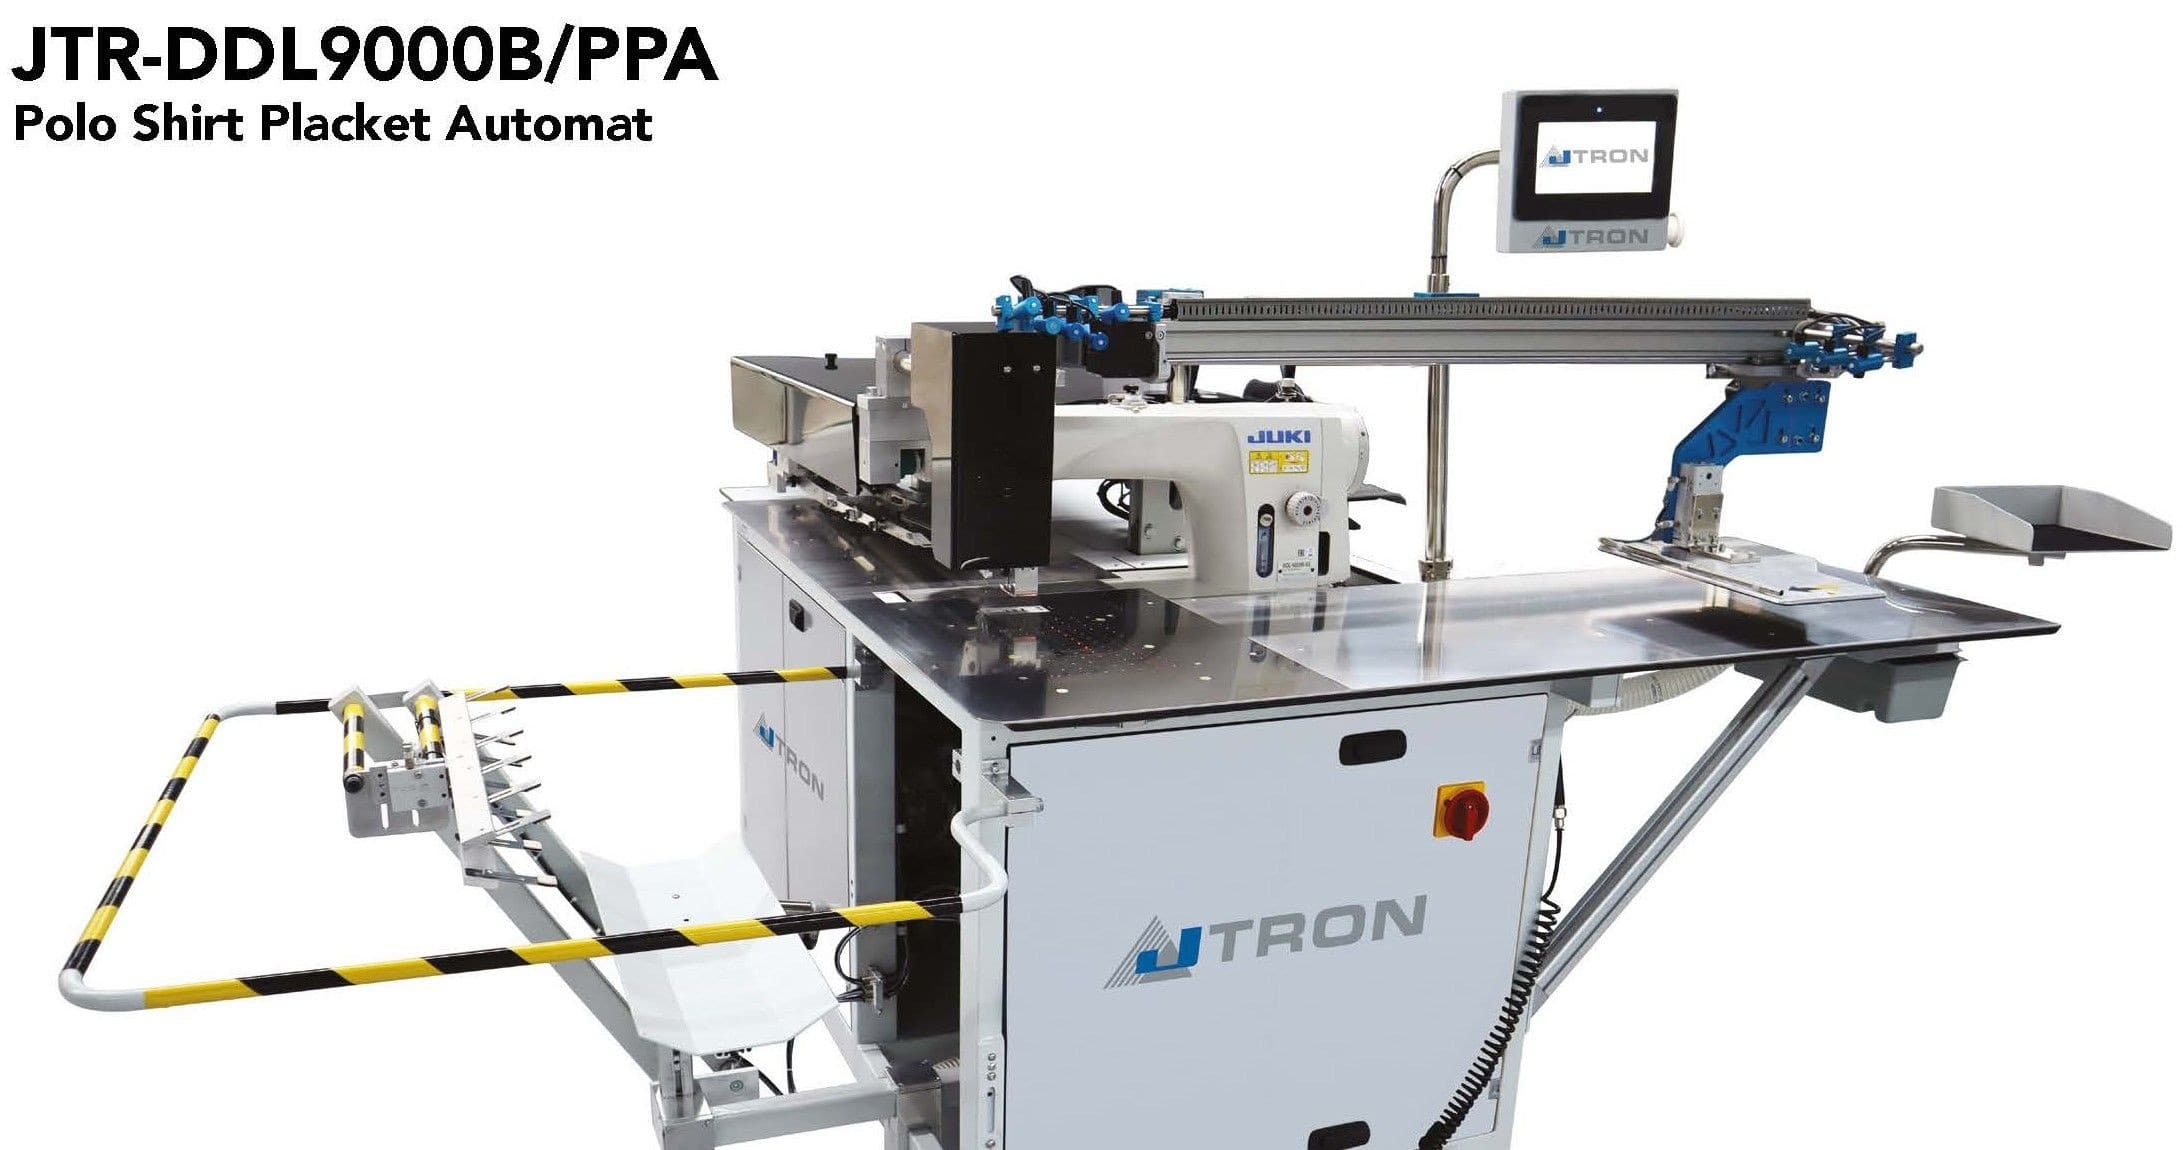 JTRON JTR-DDL9000B/PPA
Polo Shirt Placket Automat.
JTRON machine with automatic feeding and stacking units for polo shirt placket.